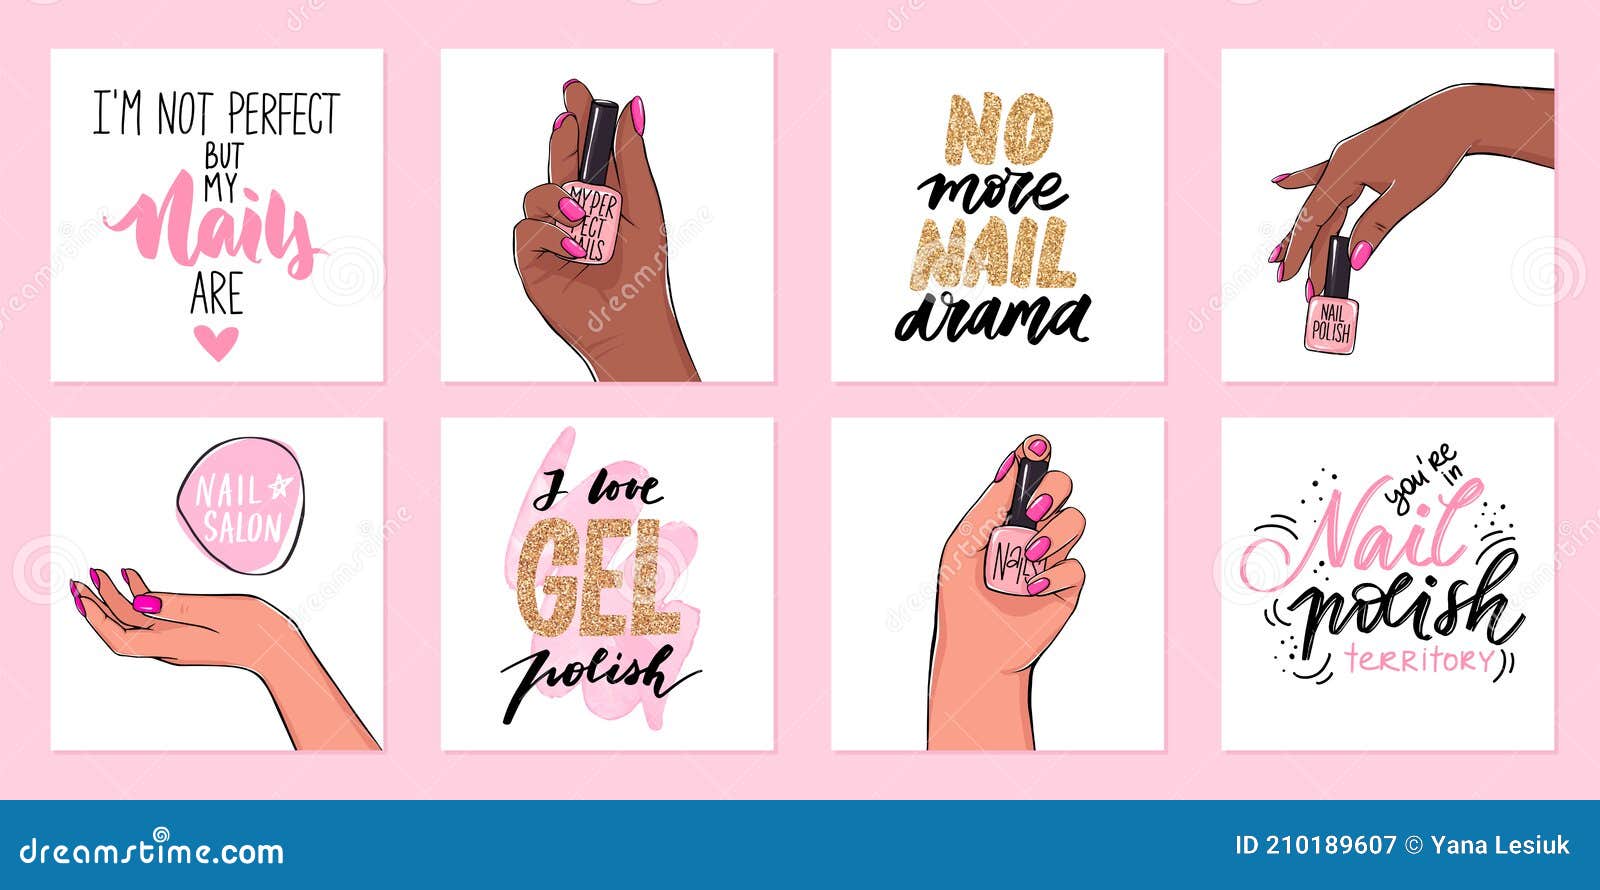 6. "Nail Art Quotes to Get You in the Mood for a Manicure" - wide 6